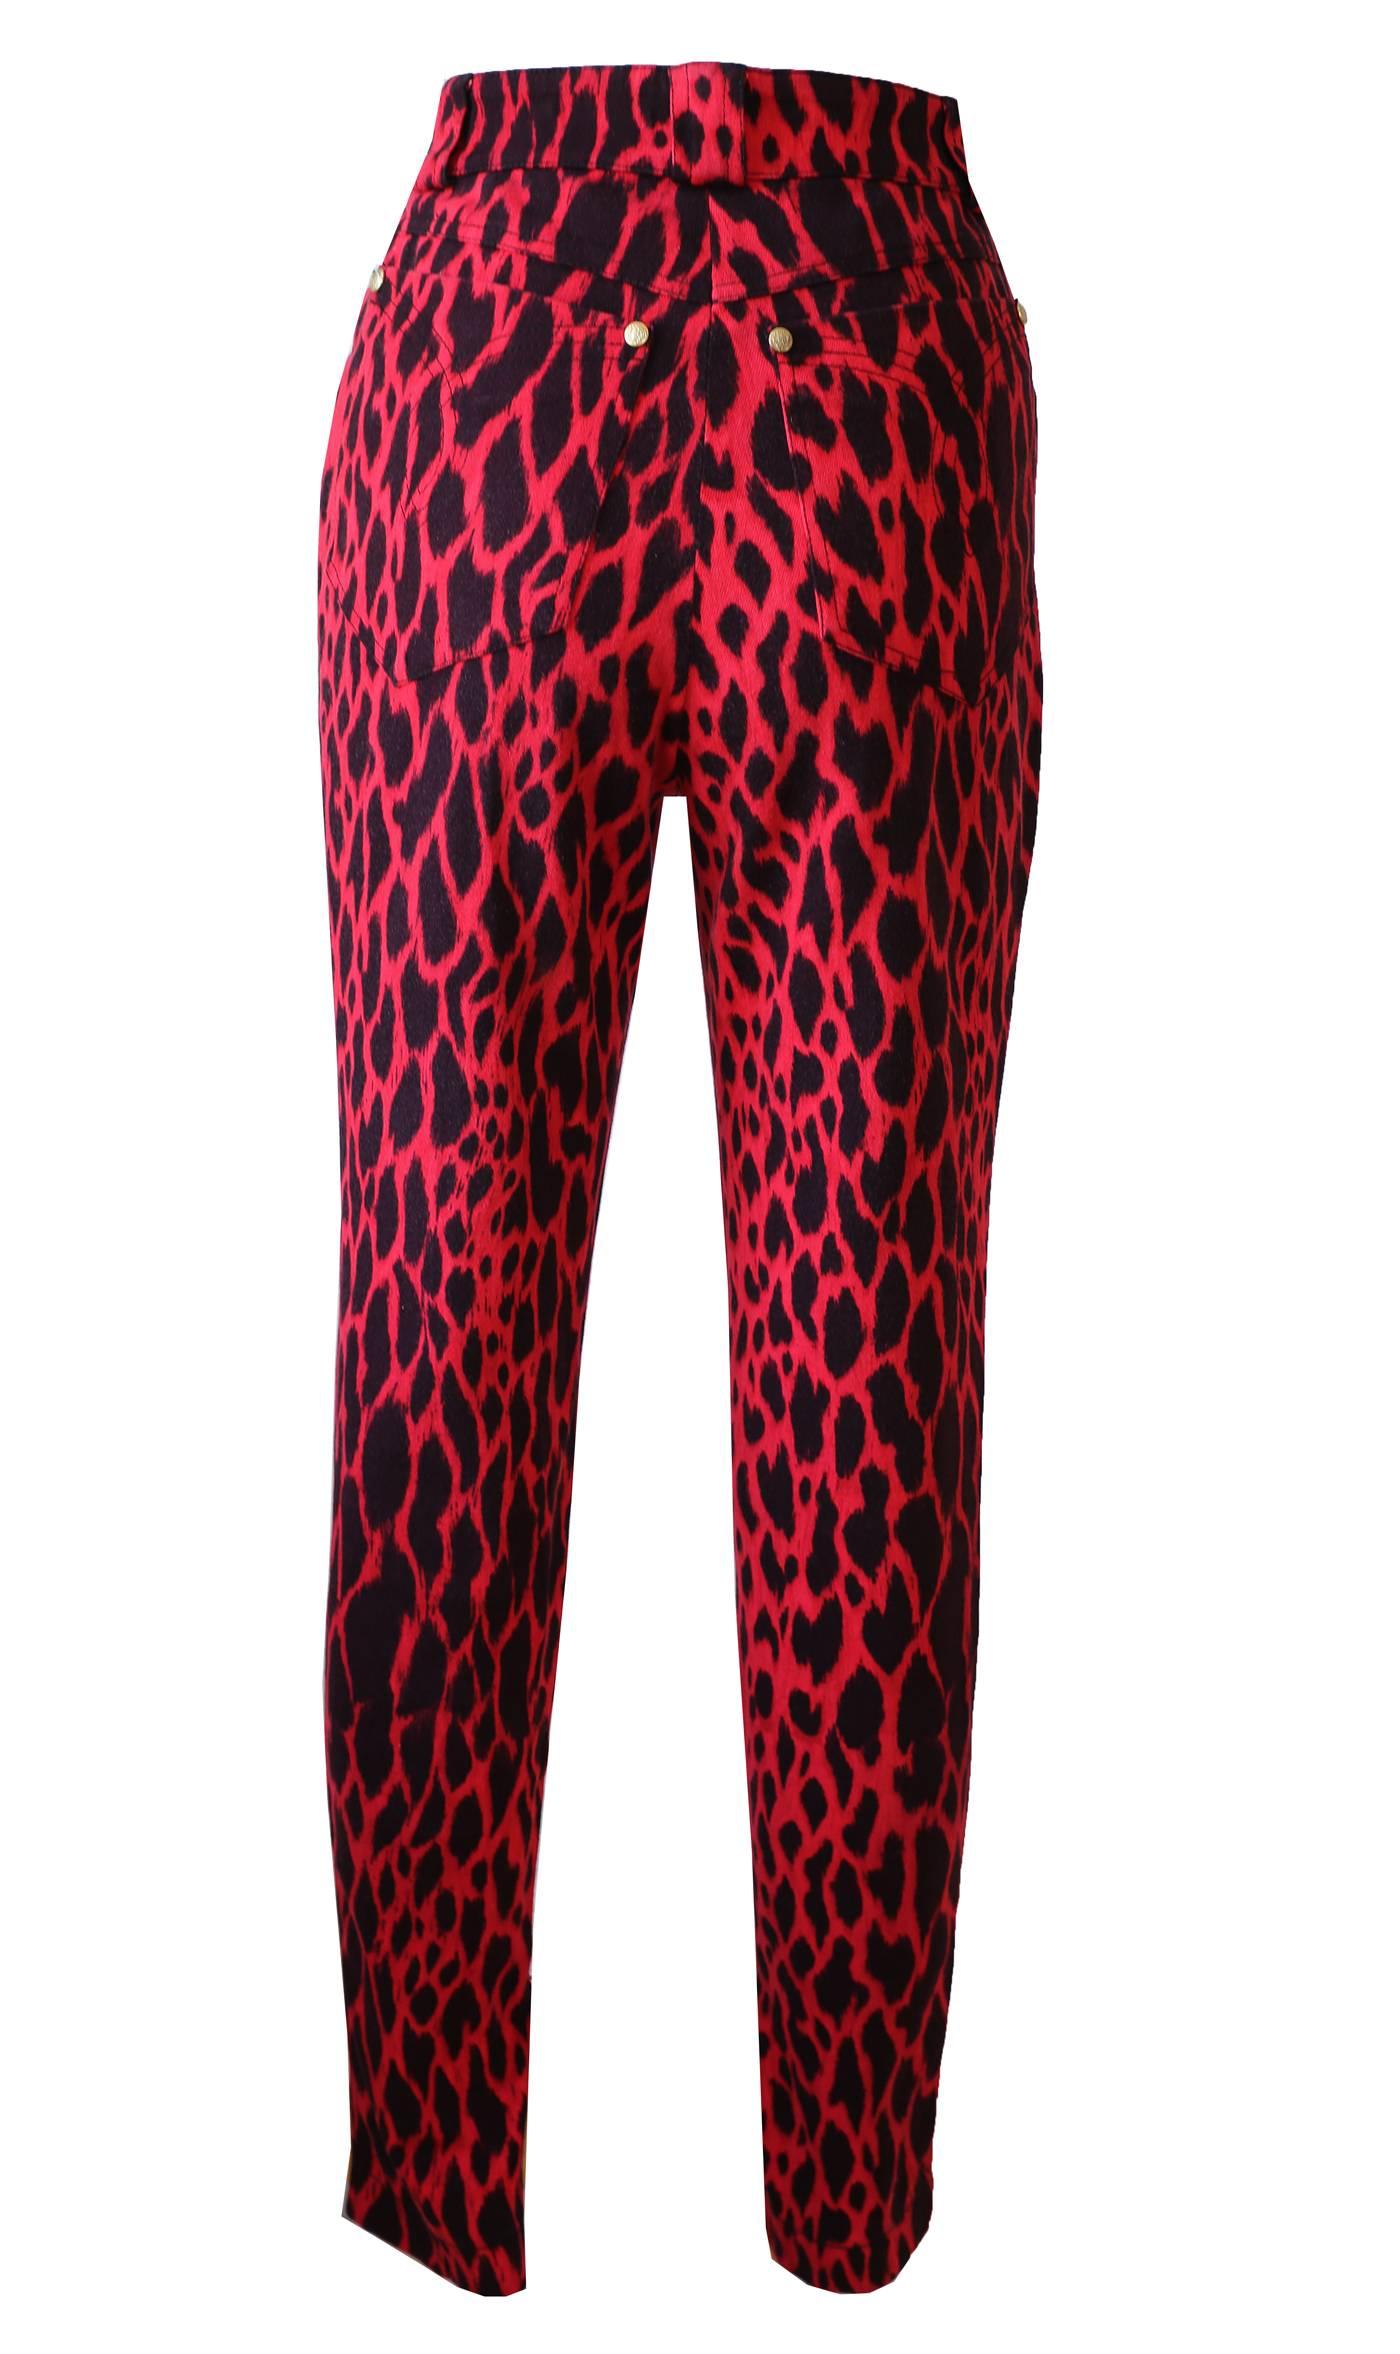 Red Gianni Versace red animal print cigarette pants, Spring - Summer 1992